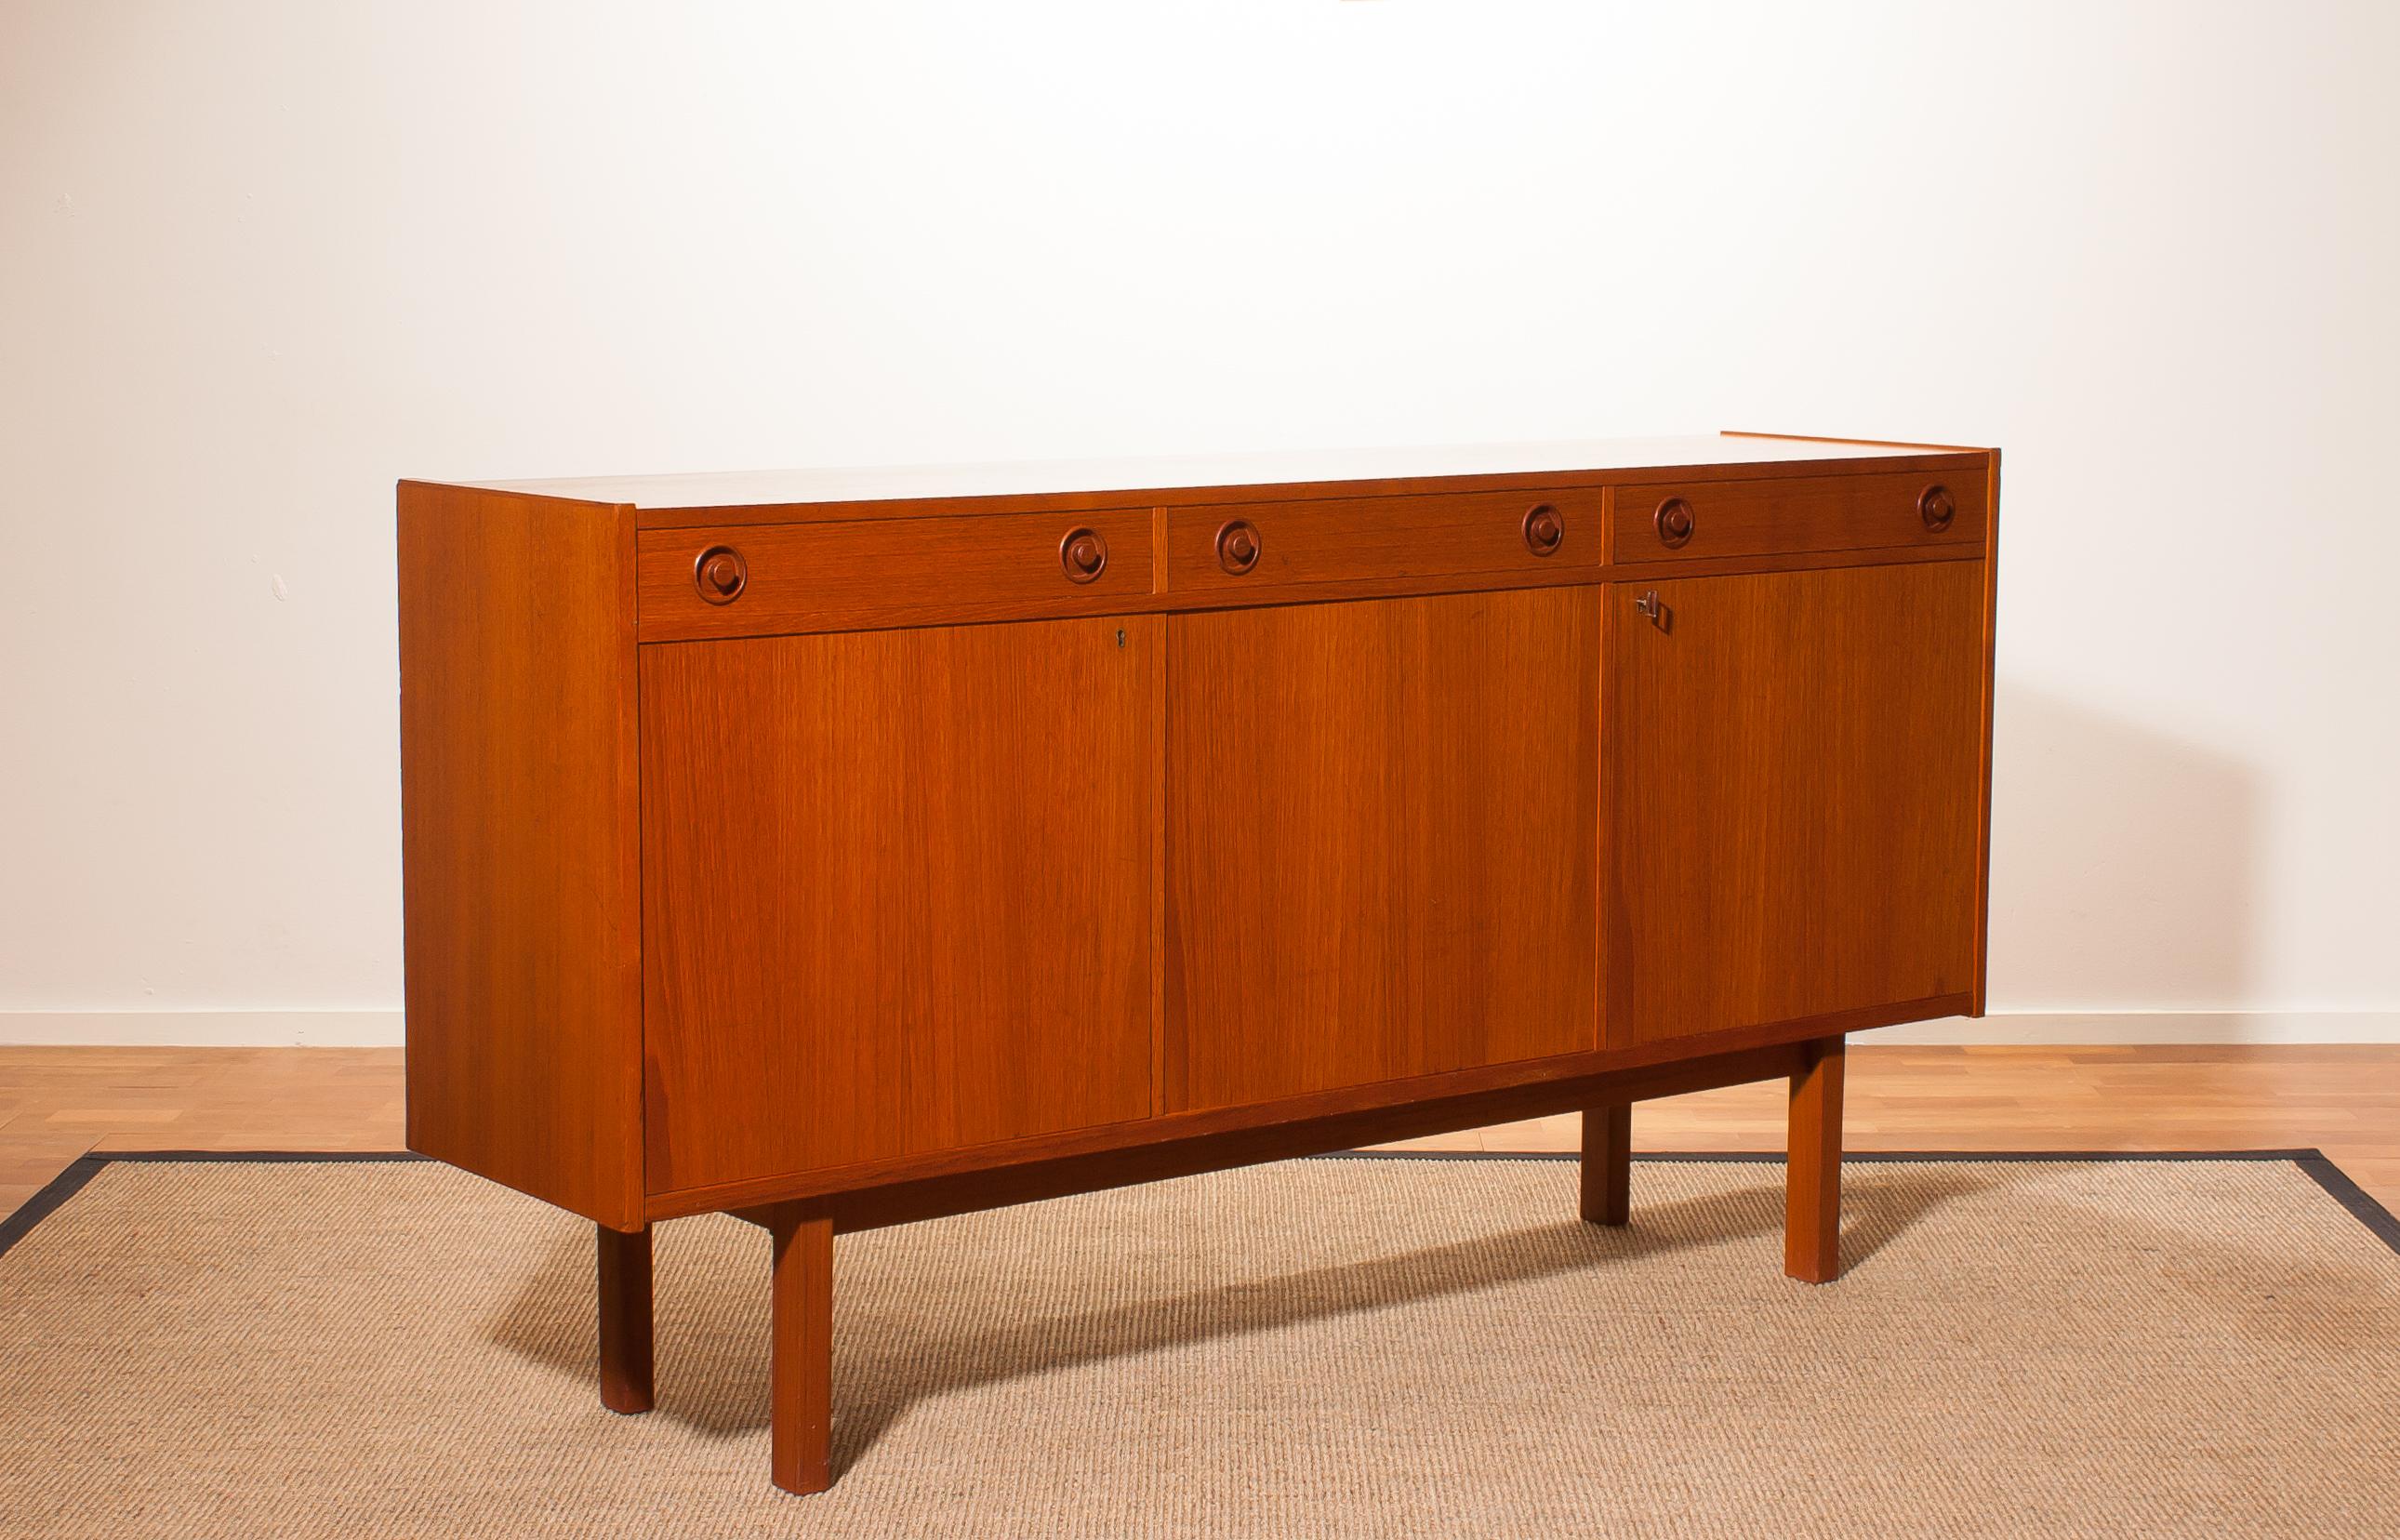 Beautiful sideboard produced by Brexo Möbler, Sweden.
This cabinet is made of teak and has three drawers and three doors.
It is in a very nice condition.
Key included.
Period 1950s
Dimensions: H 90 cm, W 170 cm, D 42 cm.